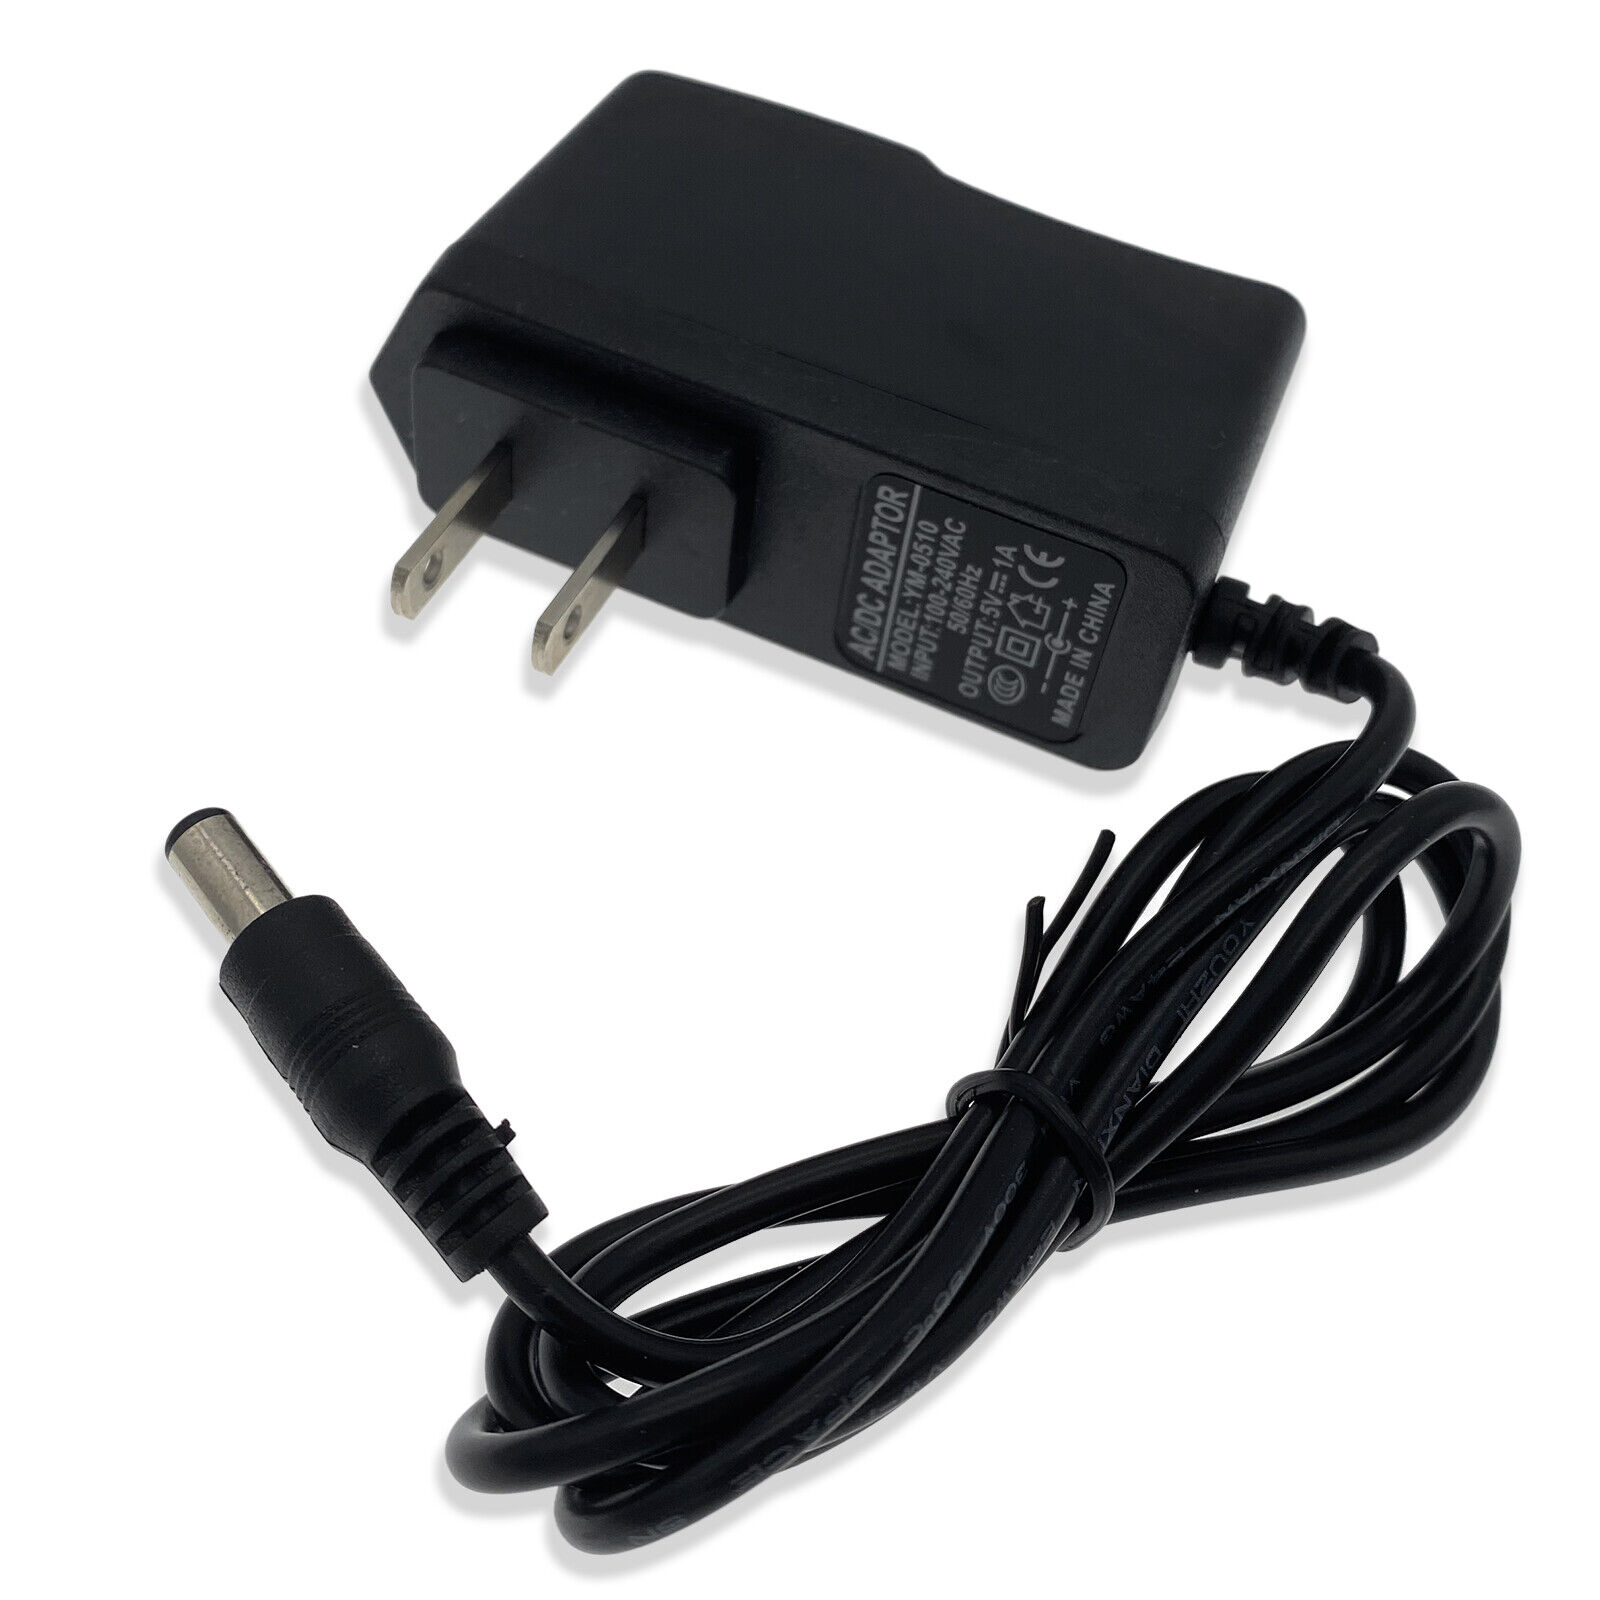 AC DC 5V 1A Adapter Charger P/N SDK-0302 Converter Switching Power Supply Cord